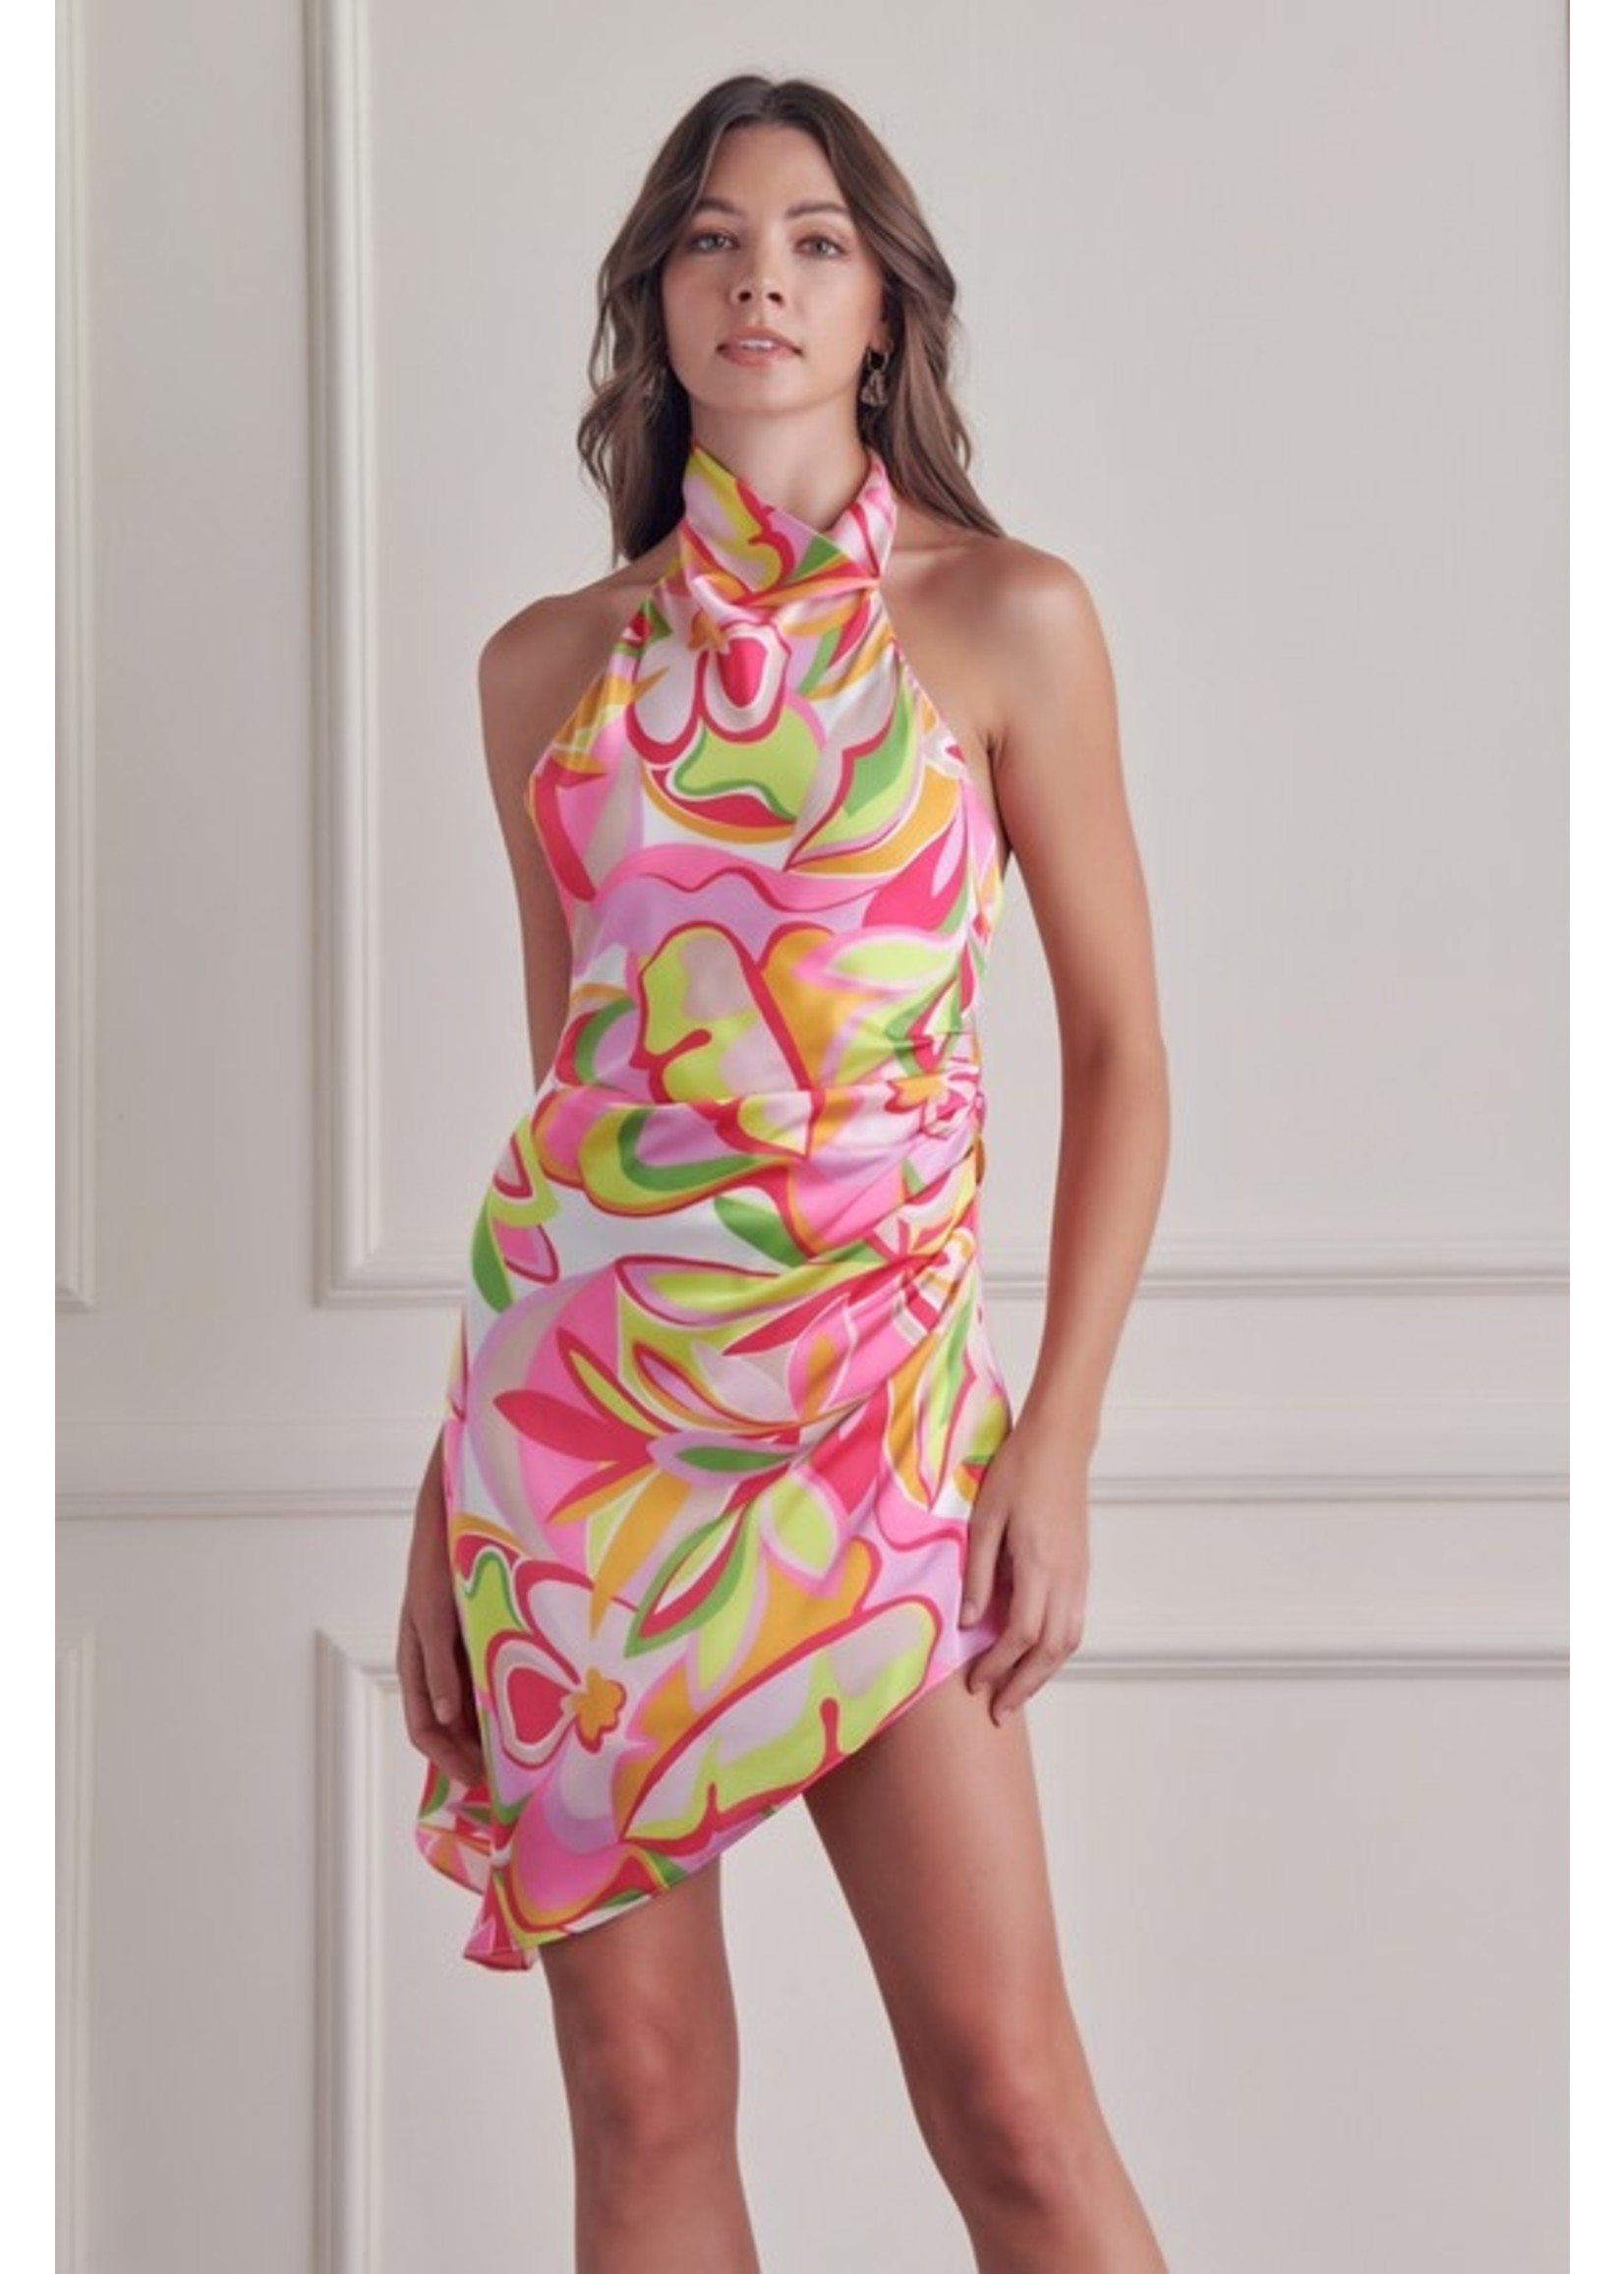 DO + BE Multi Color Front Tie Dress - GY1933OJB